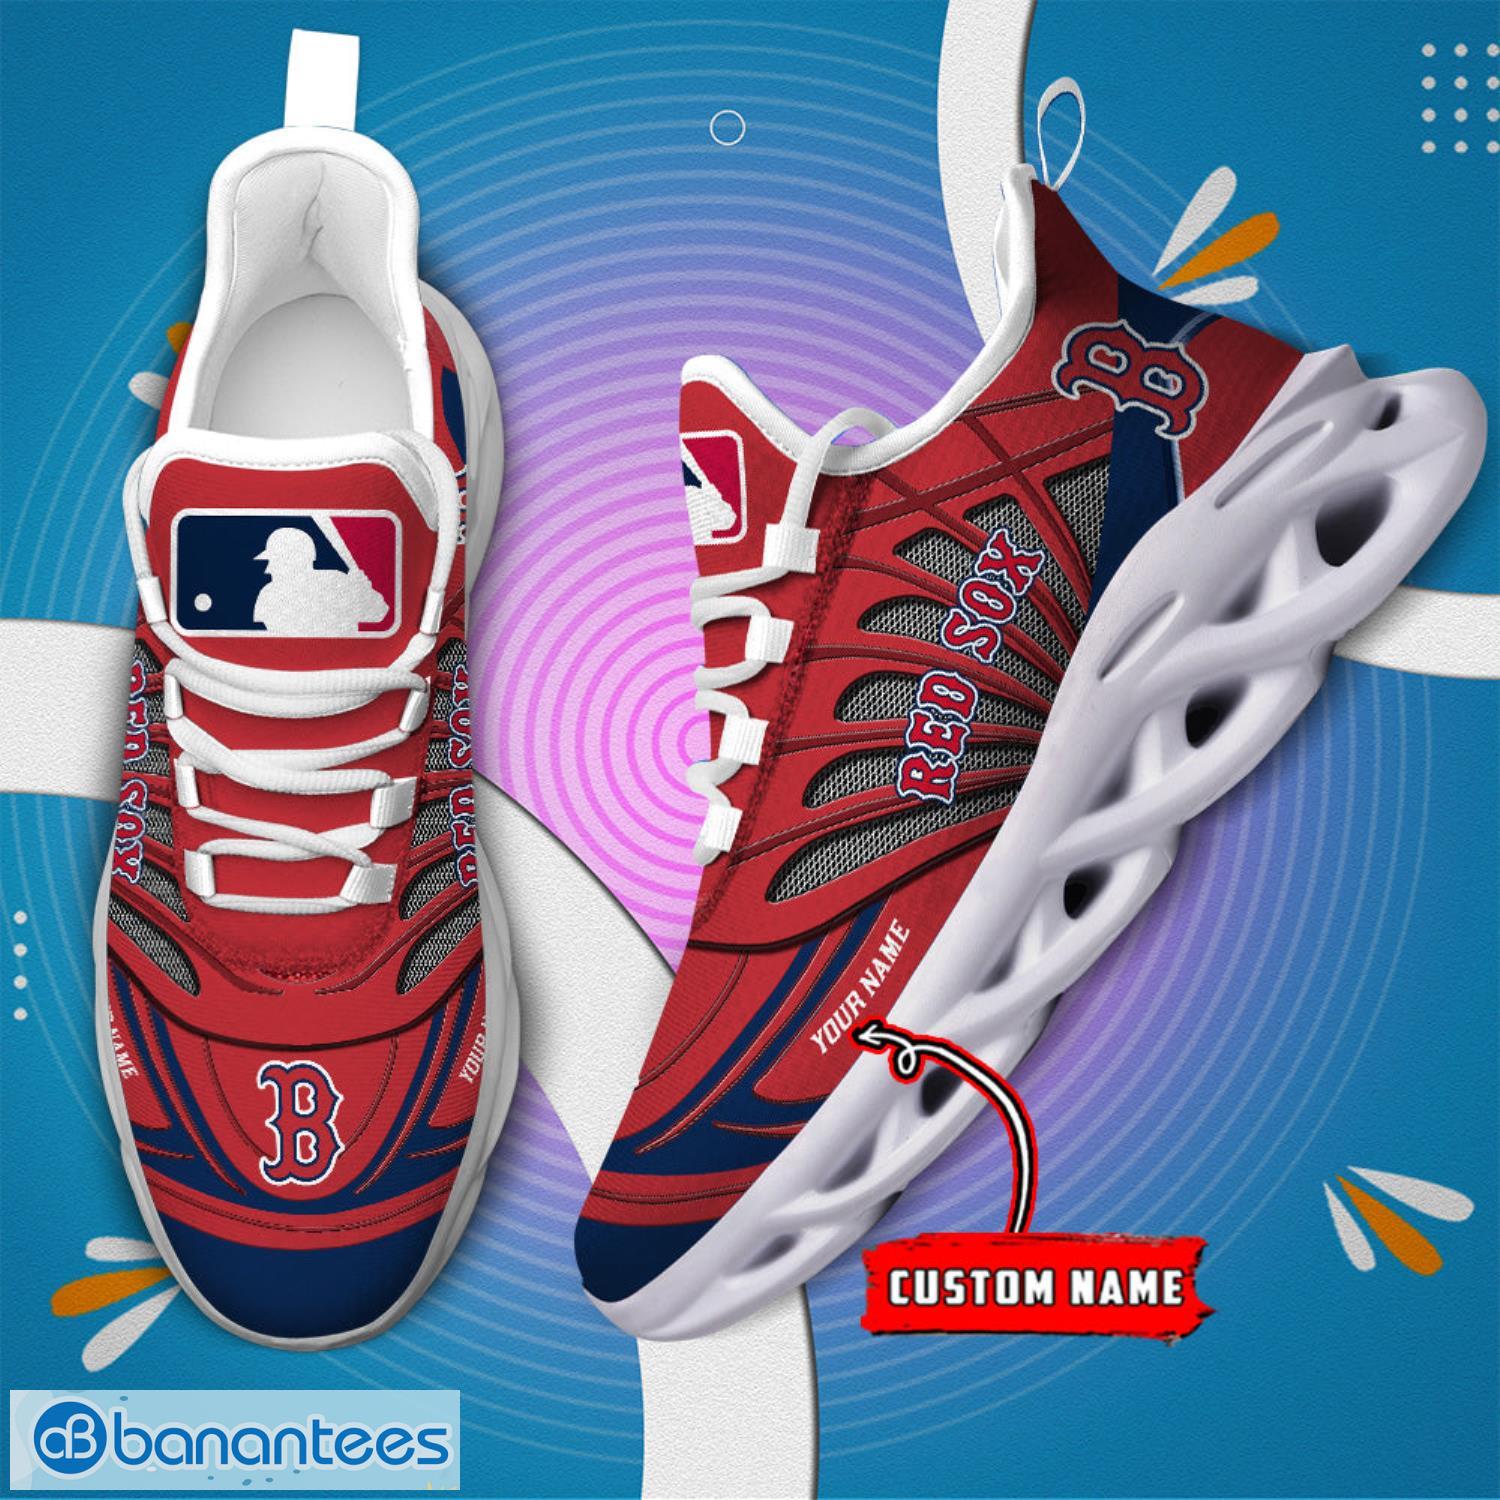 Boston Red Sox Logo Running Sneaker Max Soul Shoes In Red Gift For Men And  Women - Freedomdesign